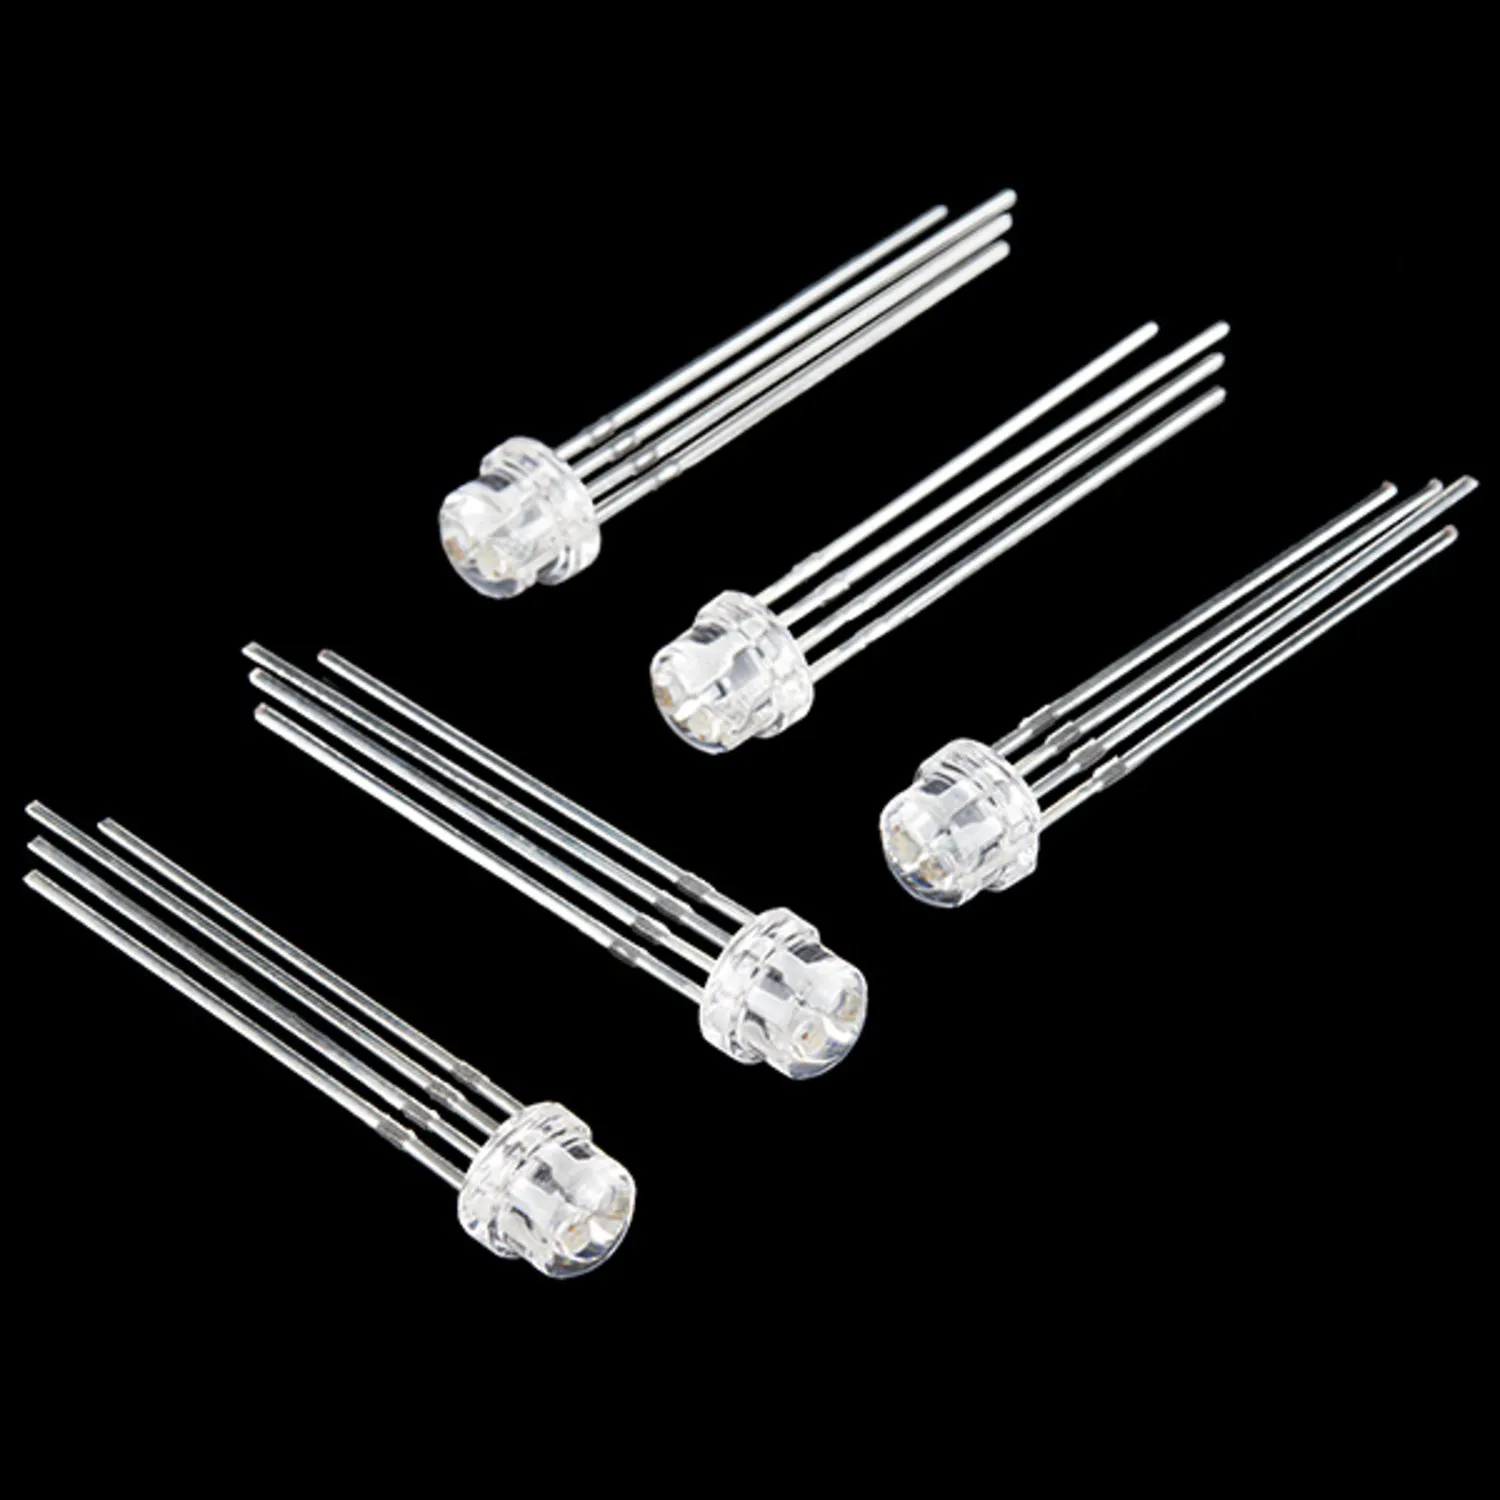 Photo of LED - RGB Addressable, PTH, 5mm Clear (5 Pack)